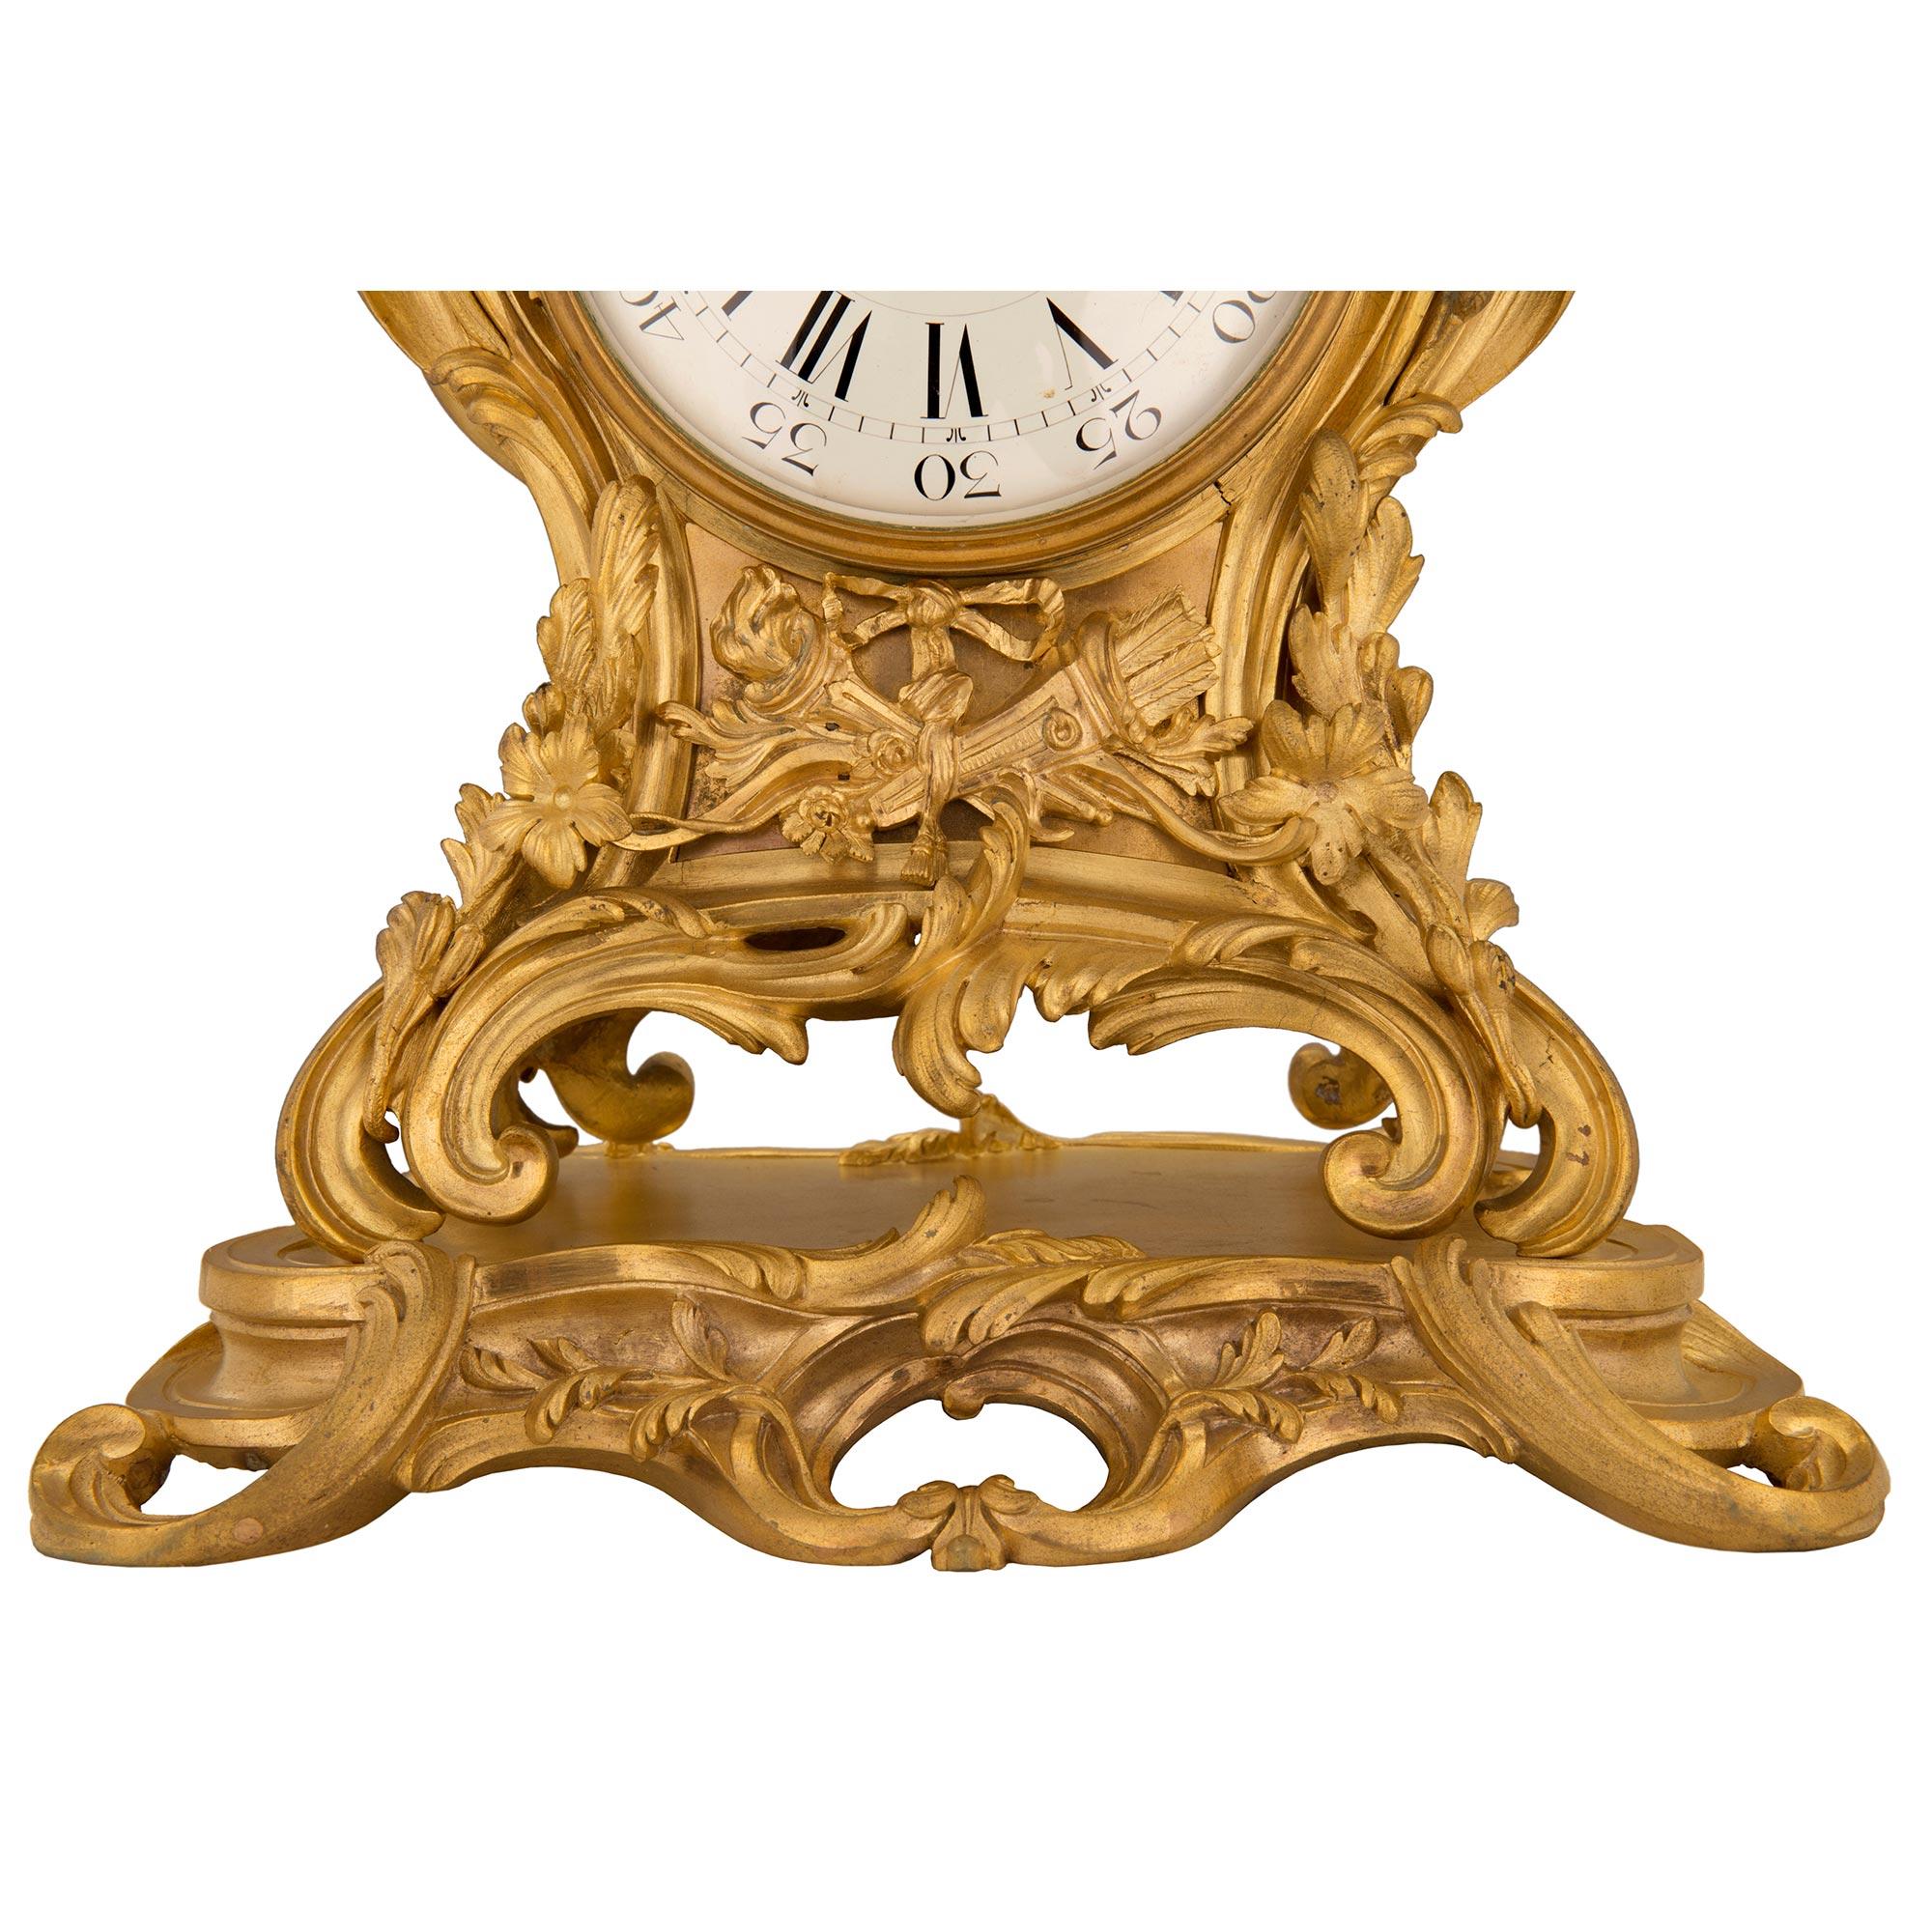 French Early 18th Century Louis XV Period Ormolu Clock For Sale 1